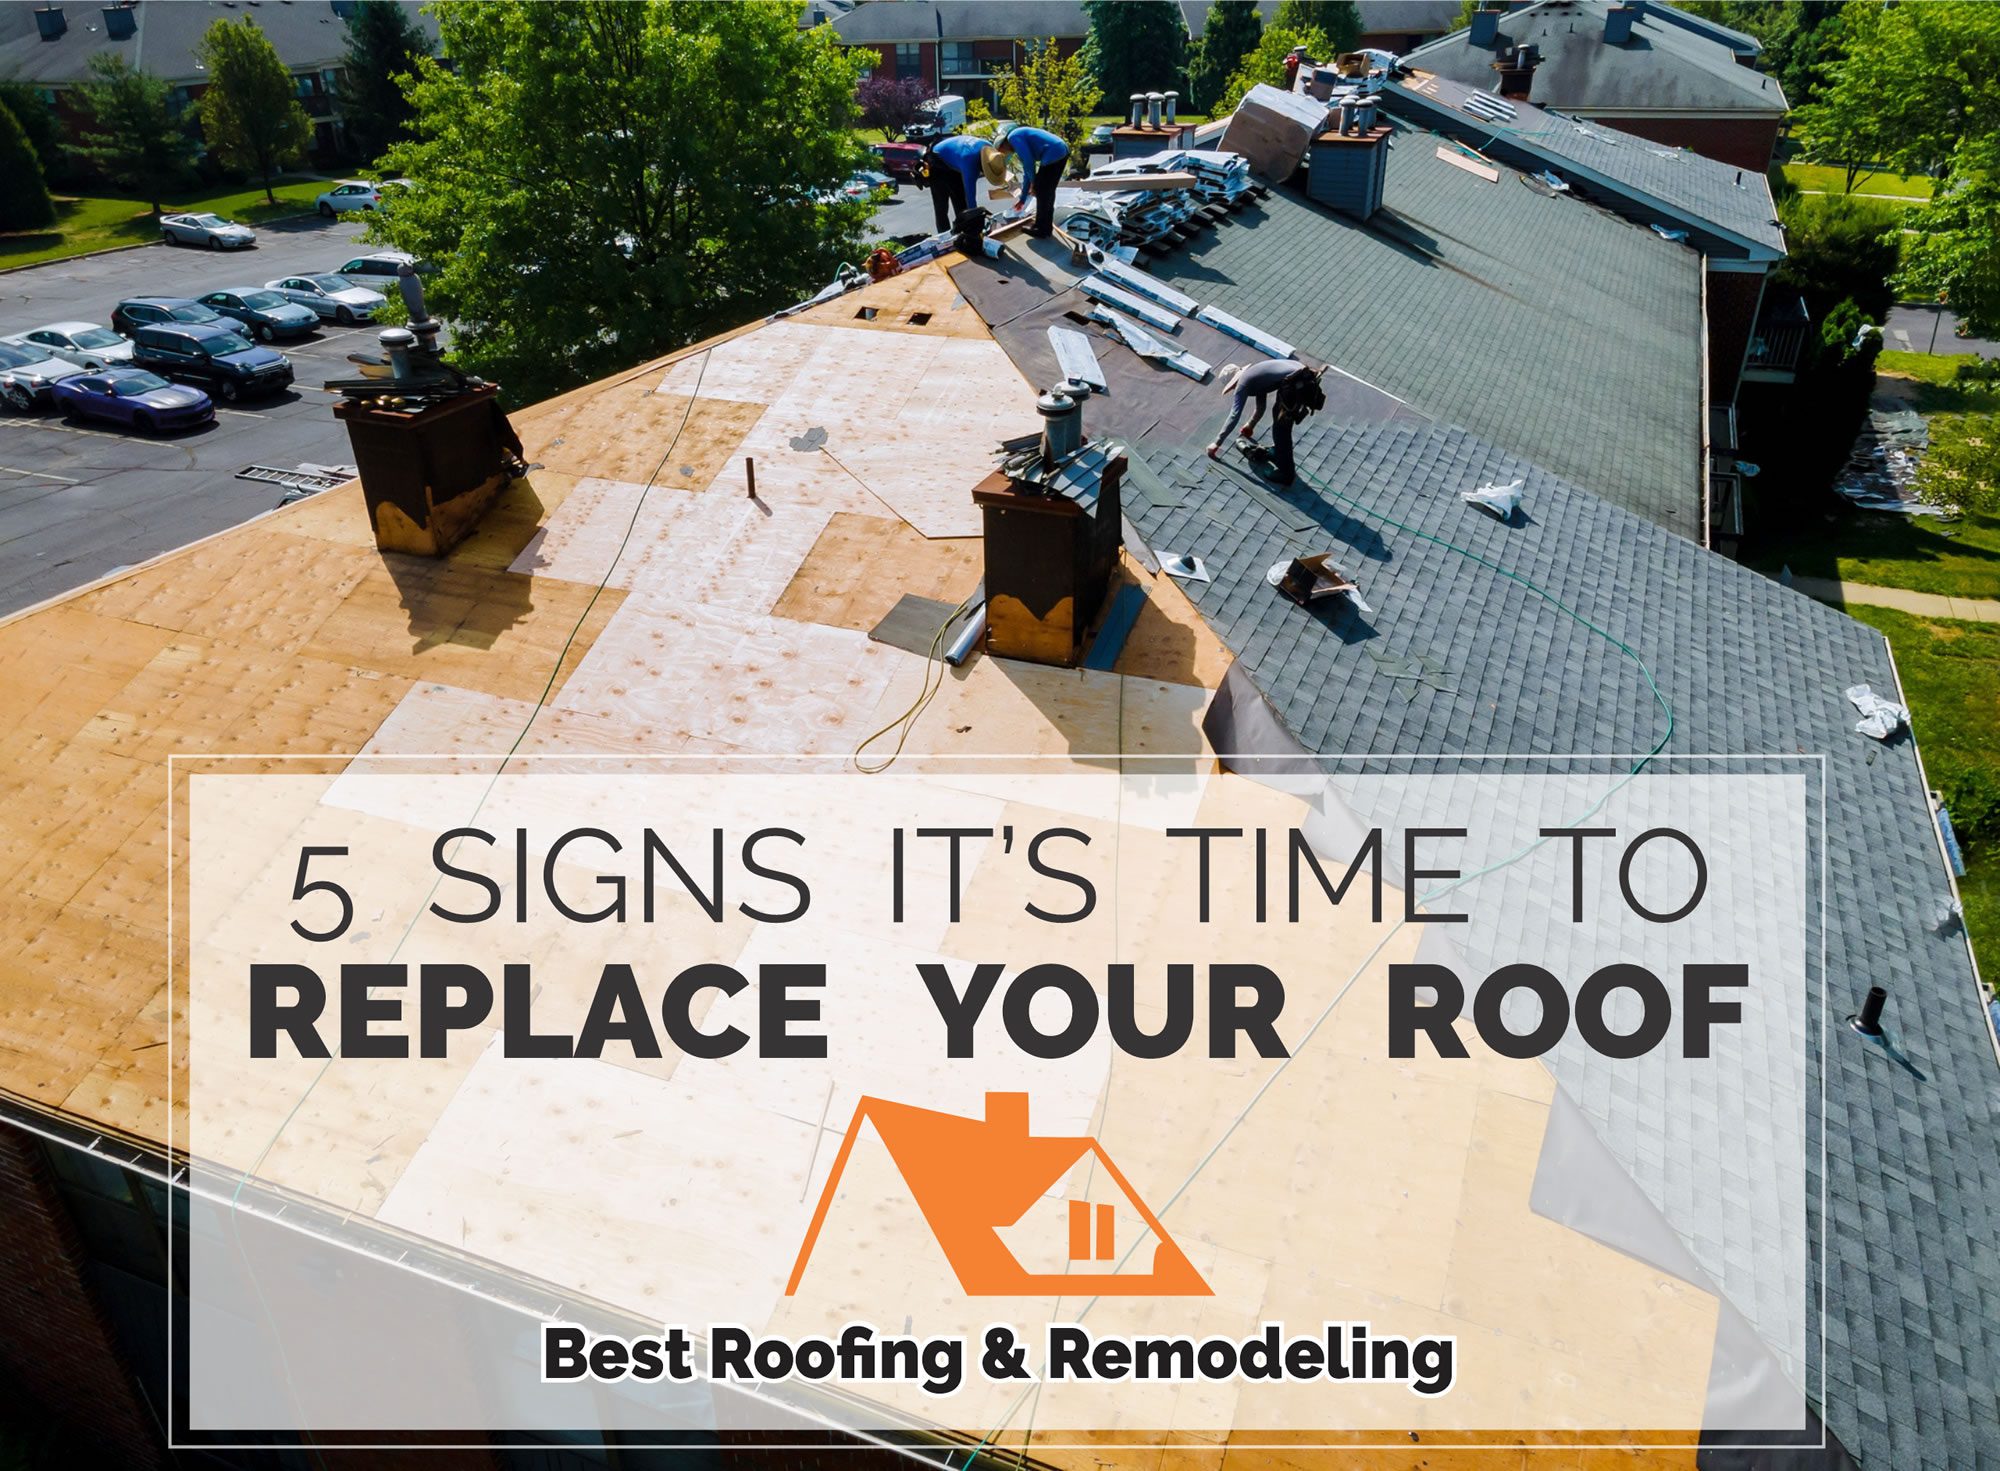 5 Signs It's Time To Replace Your Roof Waco, Texas Best Roofing & Remodeling